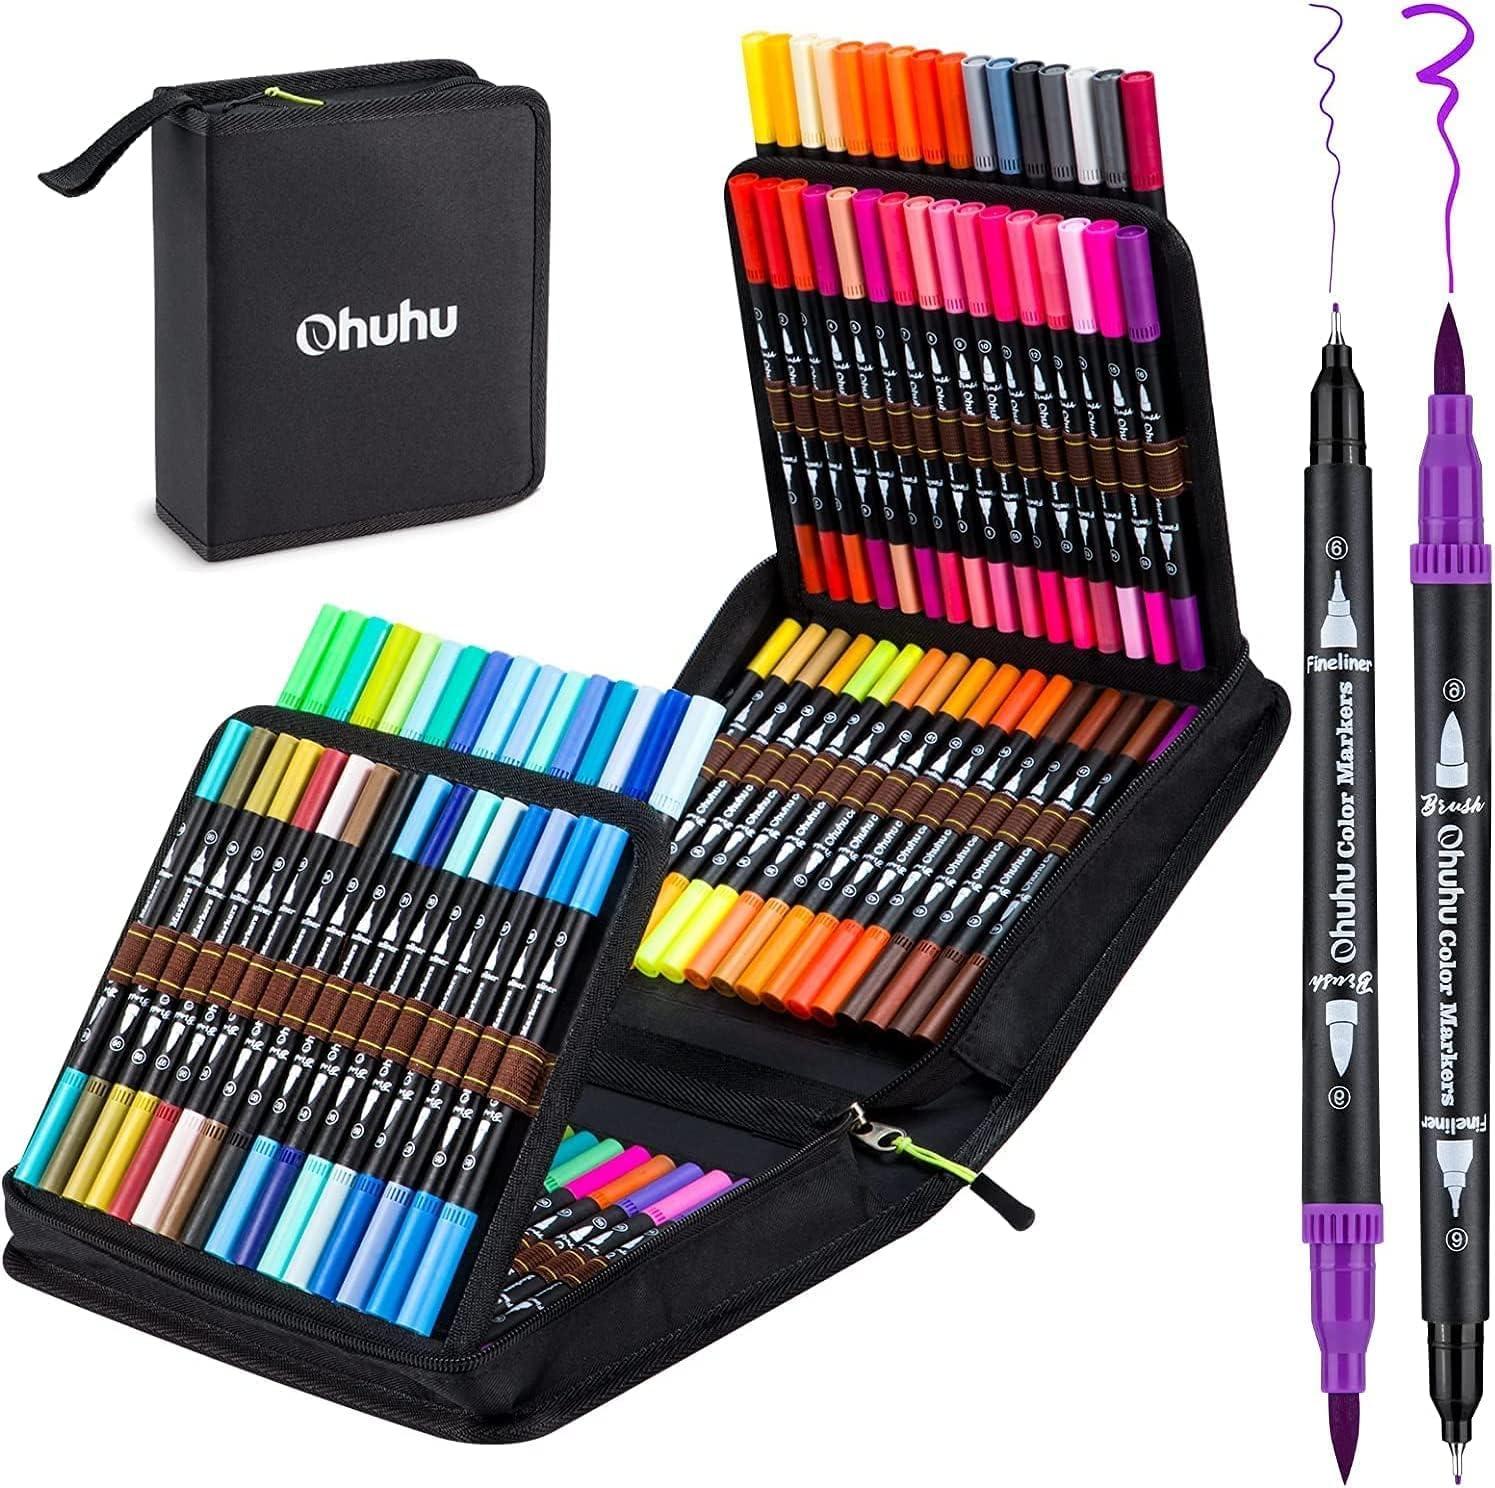 Ohuhu Store 100 Color Ohuhu Dual Brush Markers Brush Fineliner Tips Water-Based Art Marker For Adult Coloring Books